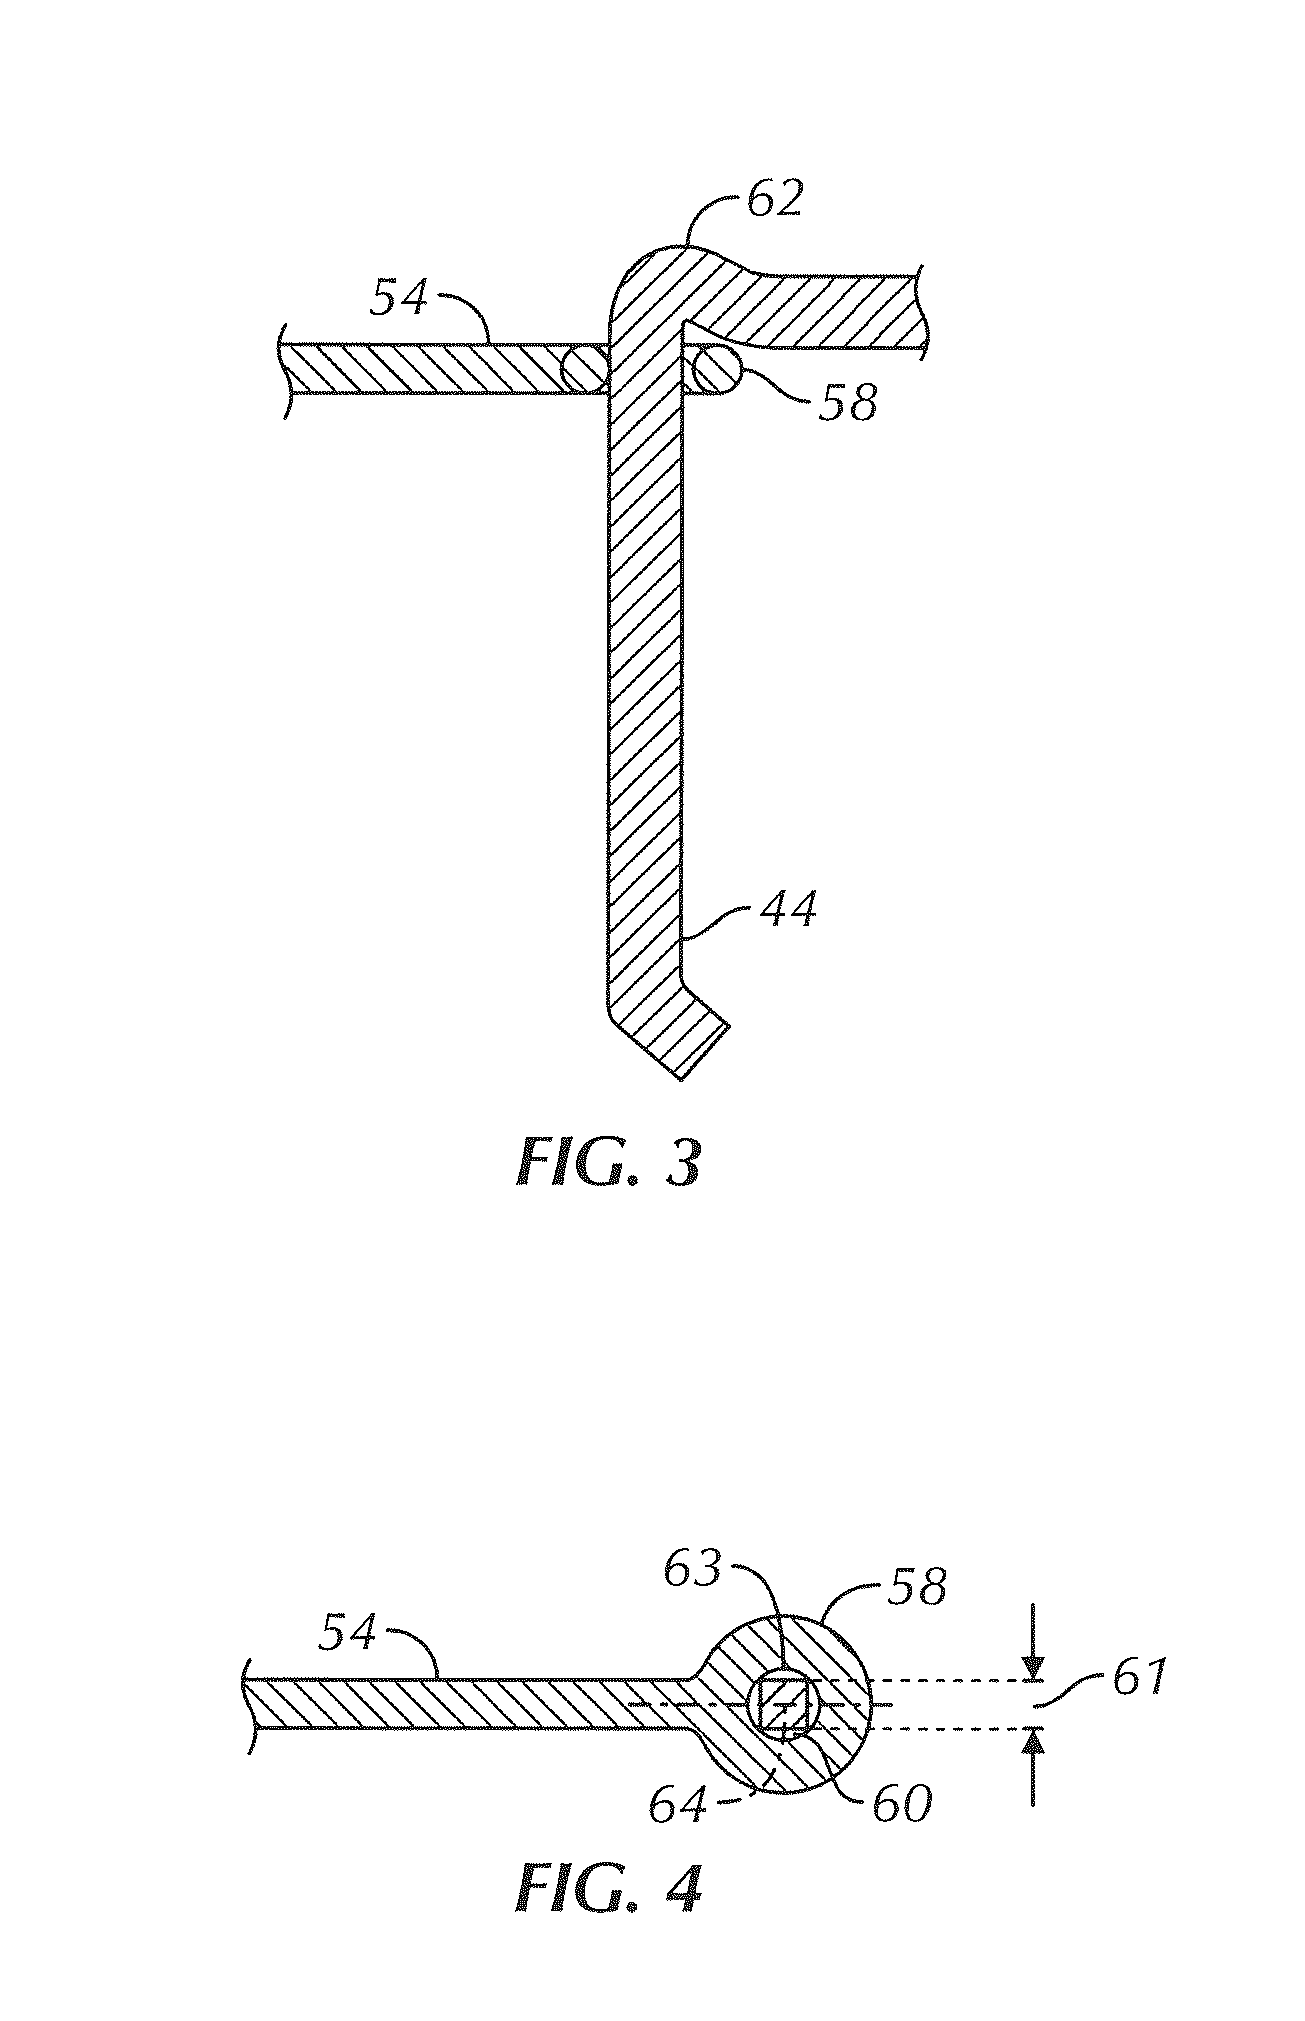 High-Strength Rectangular Wire Veneer Tie and Anchoring Systems Utilizing the Same